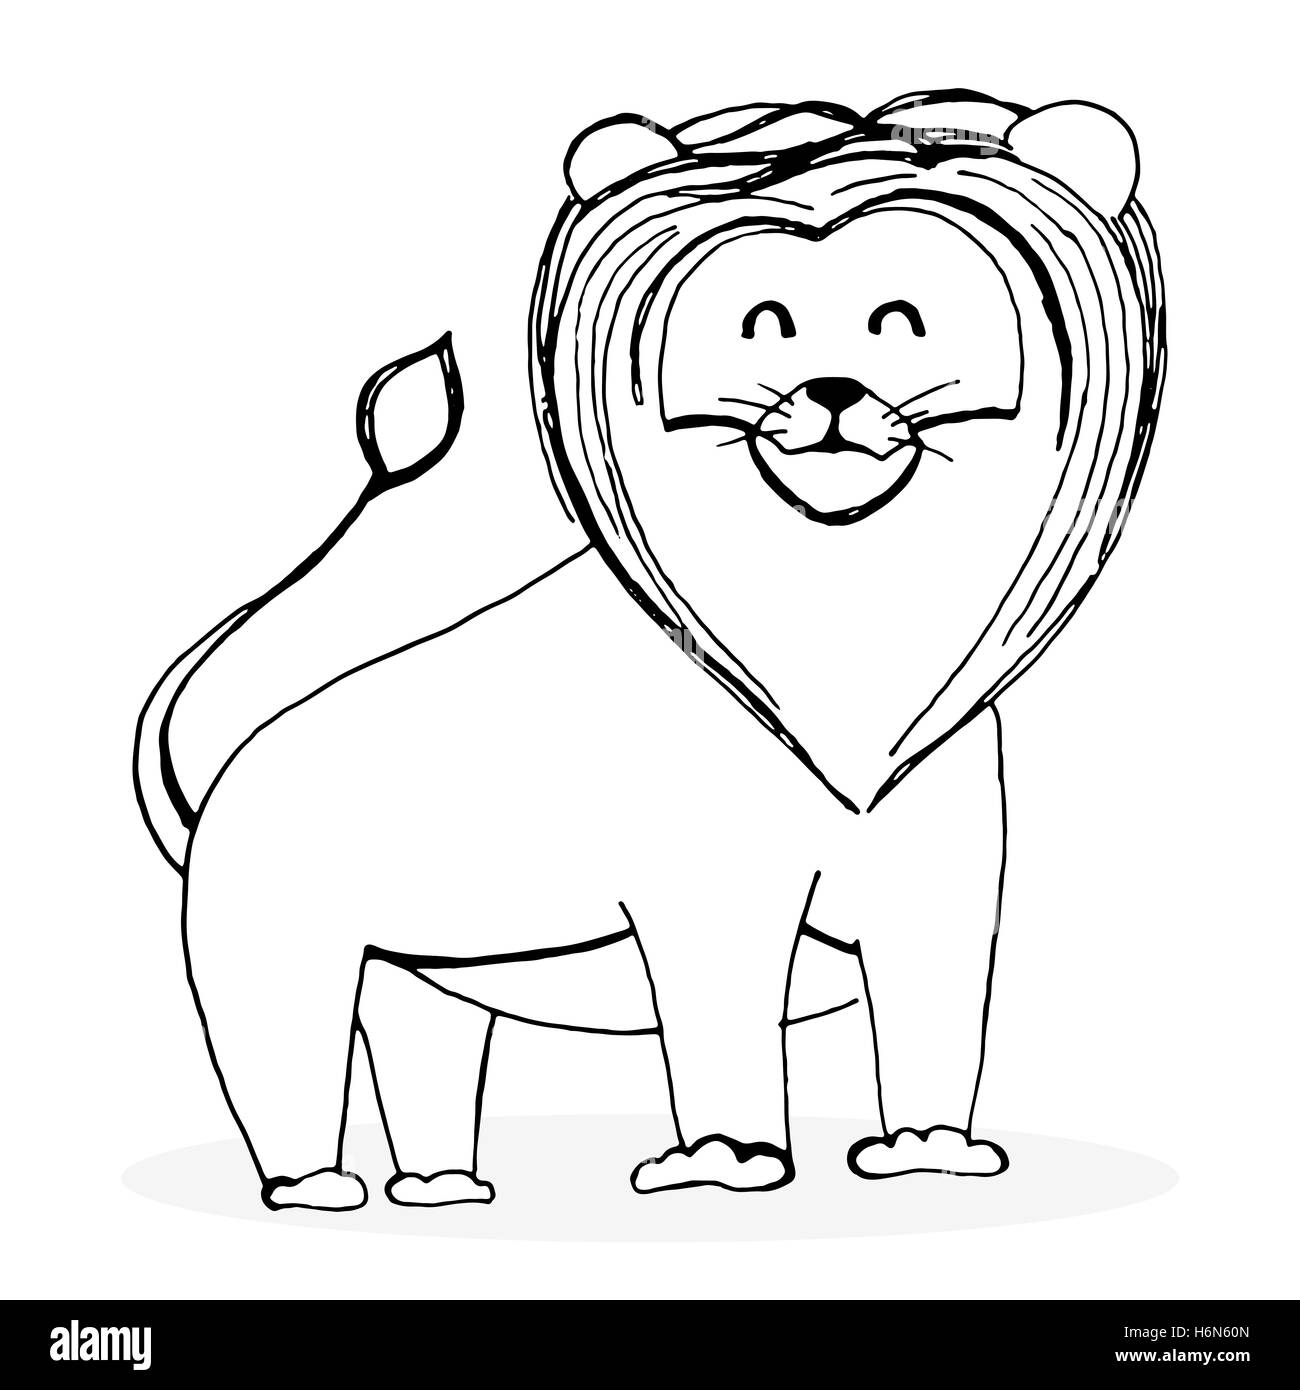 Sketch lion character. Lion drawing and animal sketch, hand drawn lion vector illustration Stock Photo